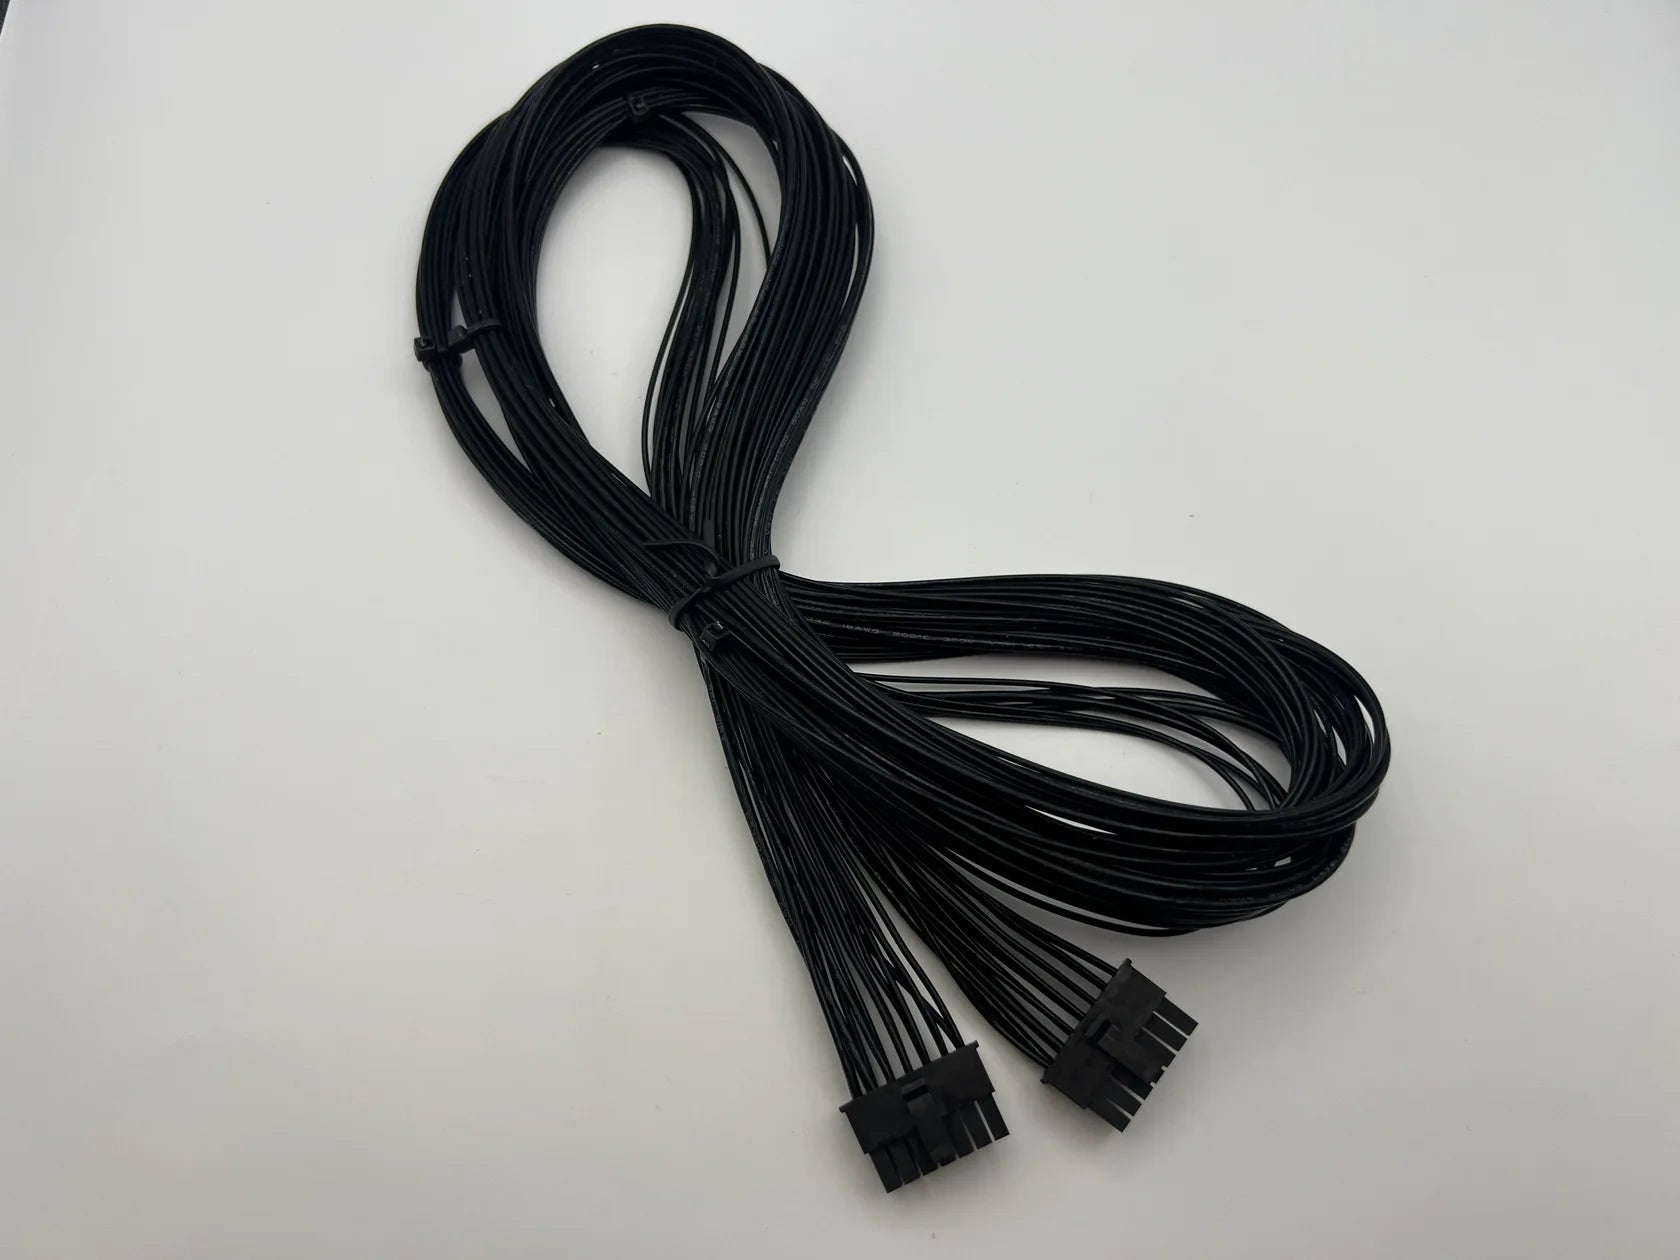 LDO Toolhead PCB Wiring Loom Cable for LDO Voron 2.4 and Voron Trident Kits